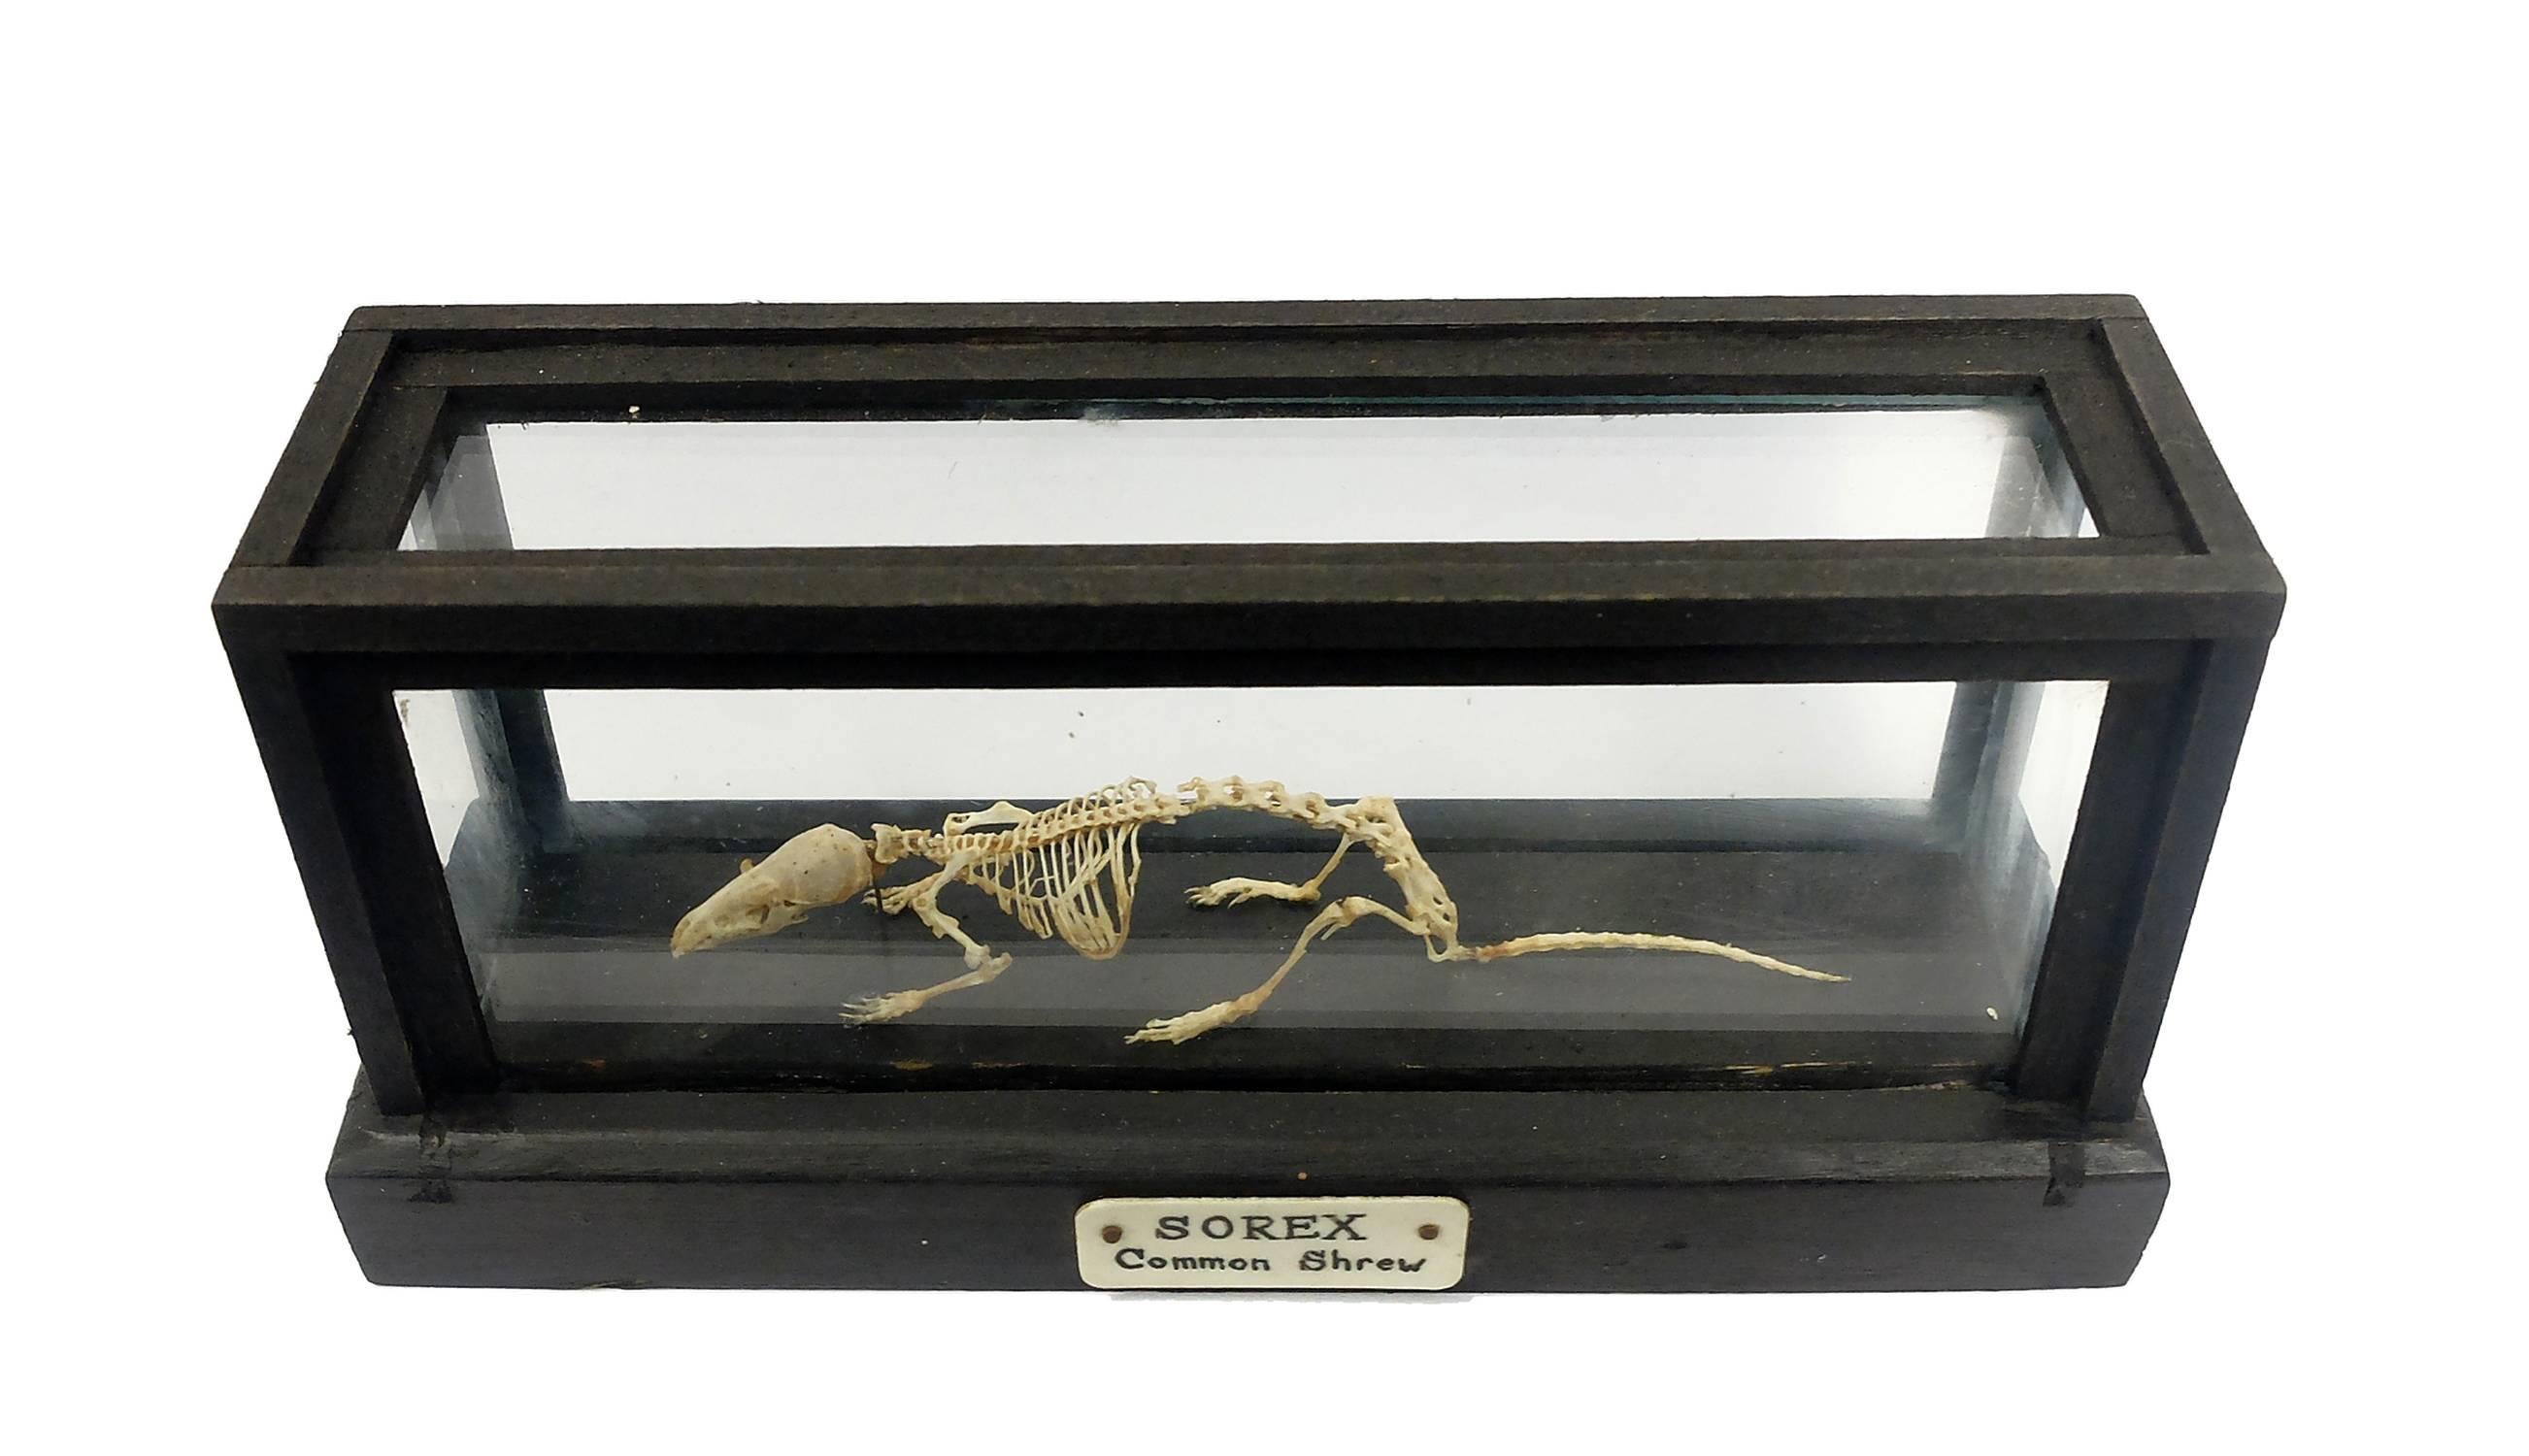 A natural specimen of a mouse Sorex Araneus Common Shrews skeleton for Wunderkammer. The specimen is mounted inside a wooden and glass case on a wooden base.